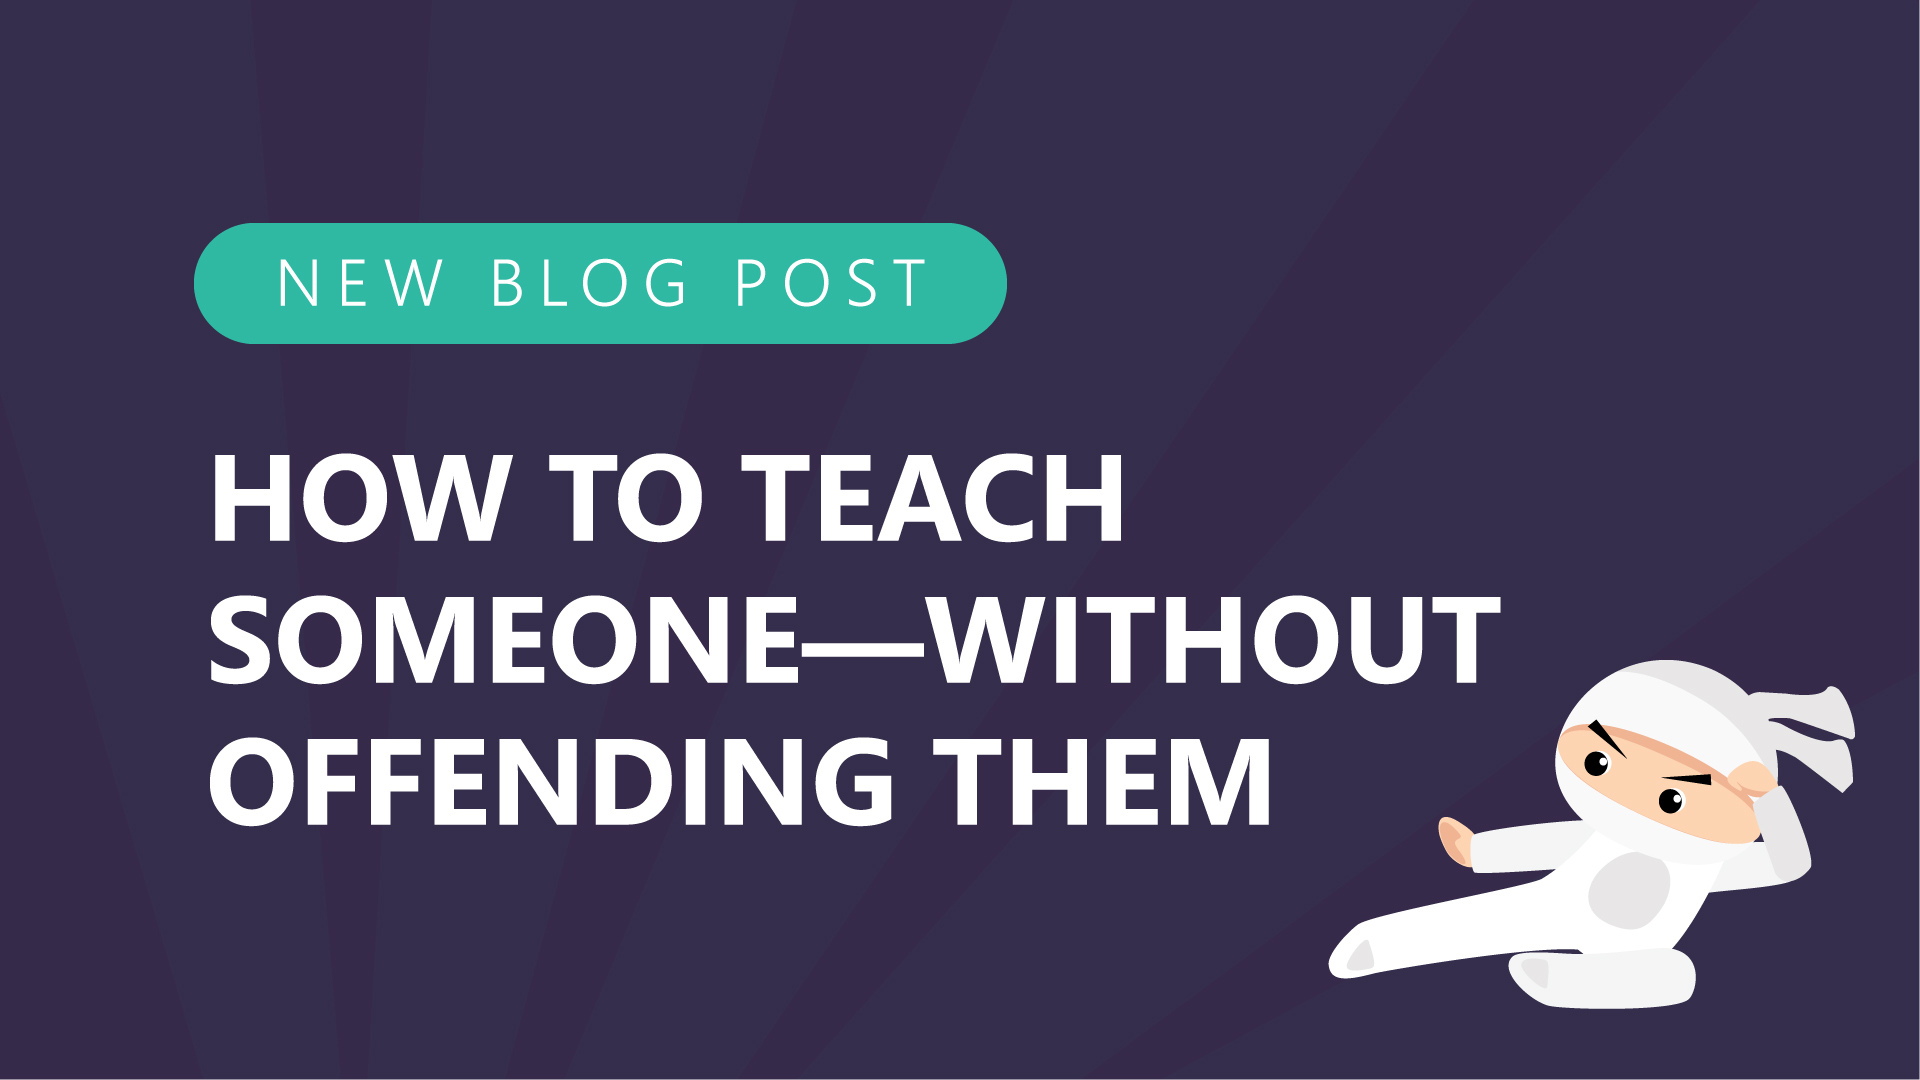 How to teach someone—without offending them